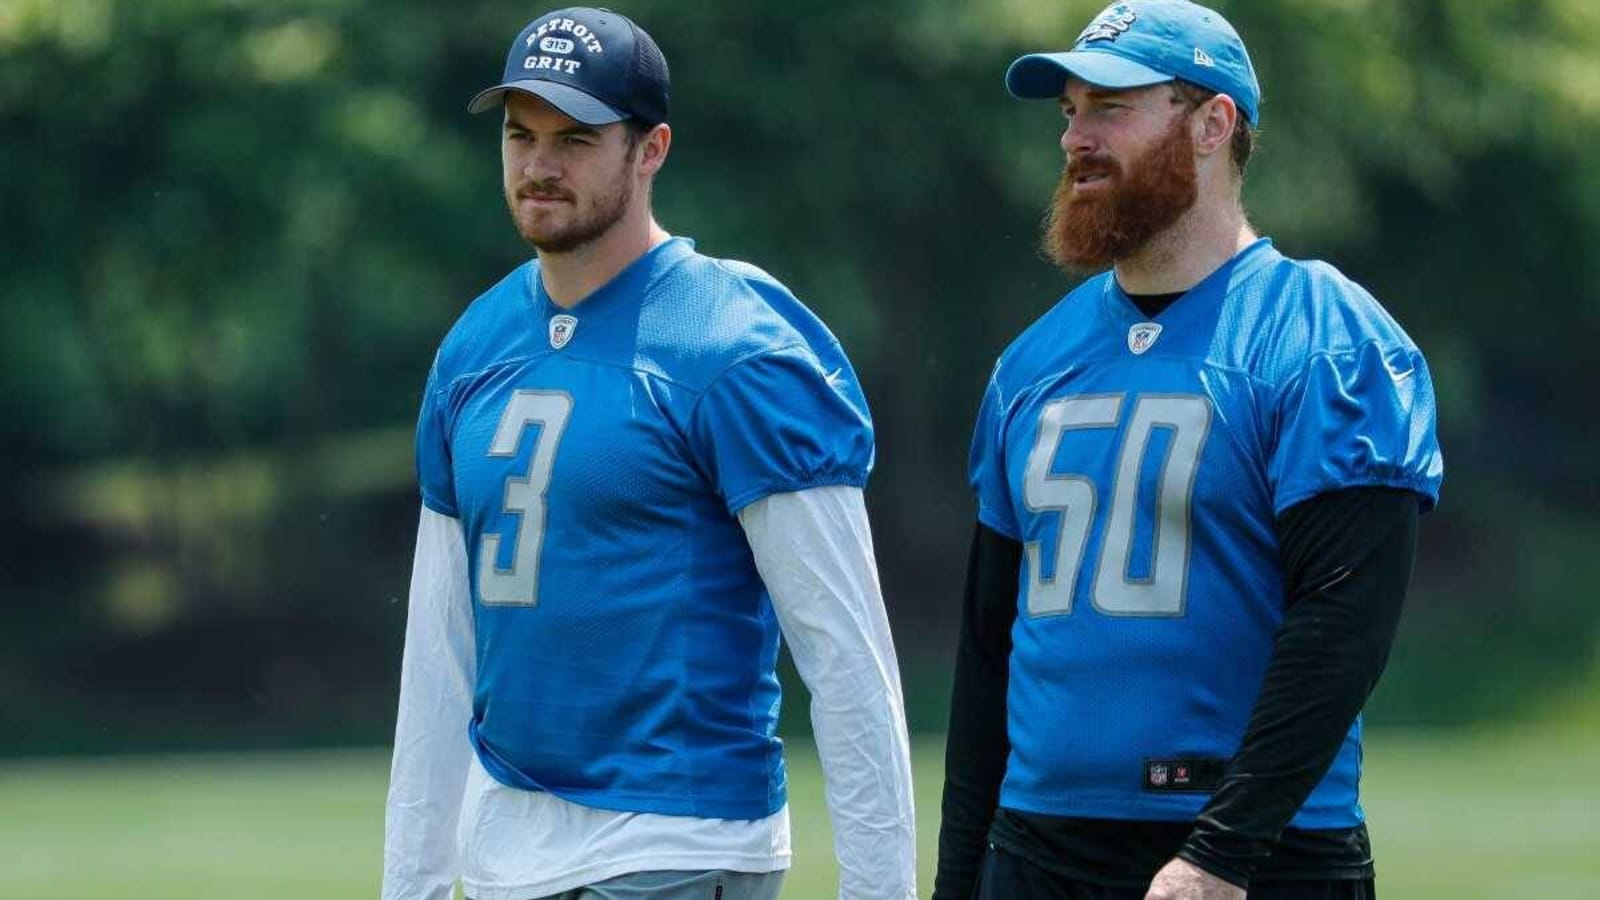 Lions sign Jake McQuaide to practice squad